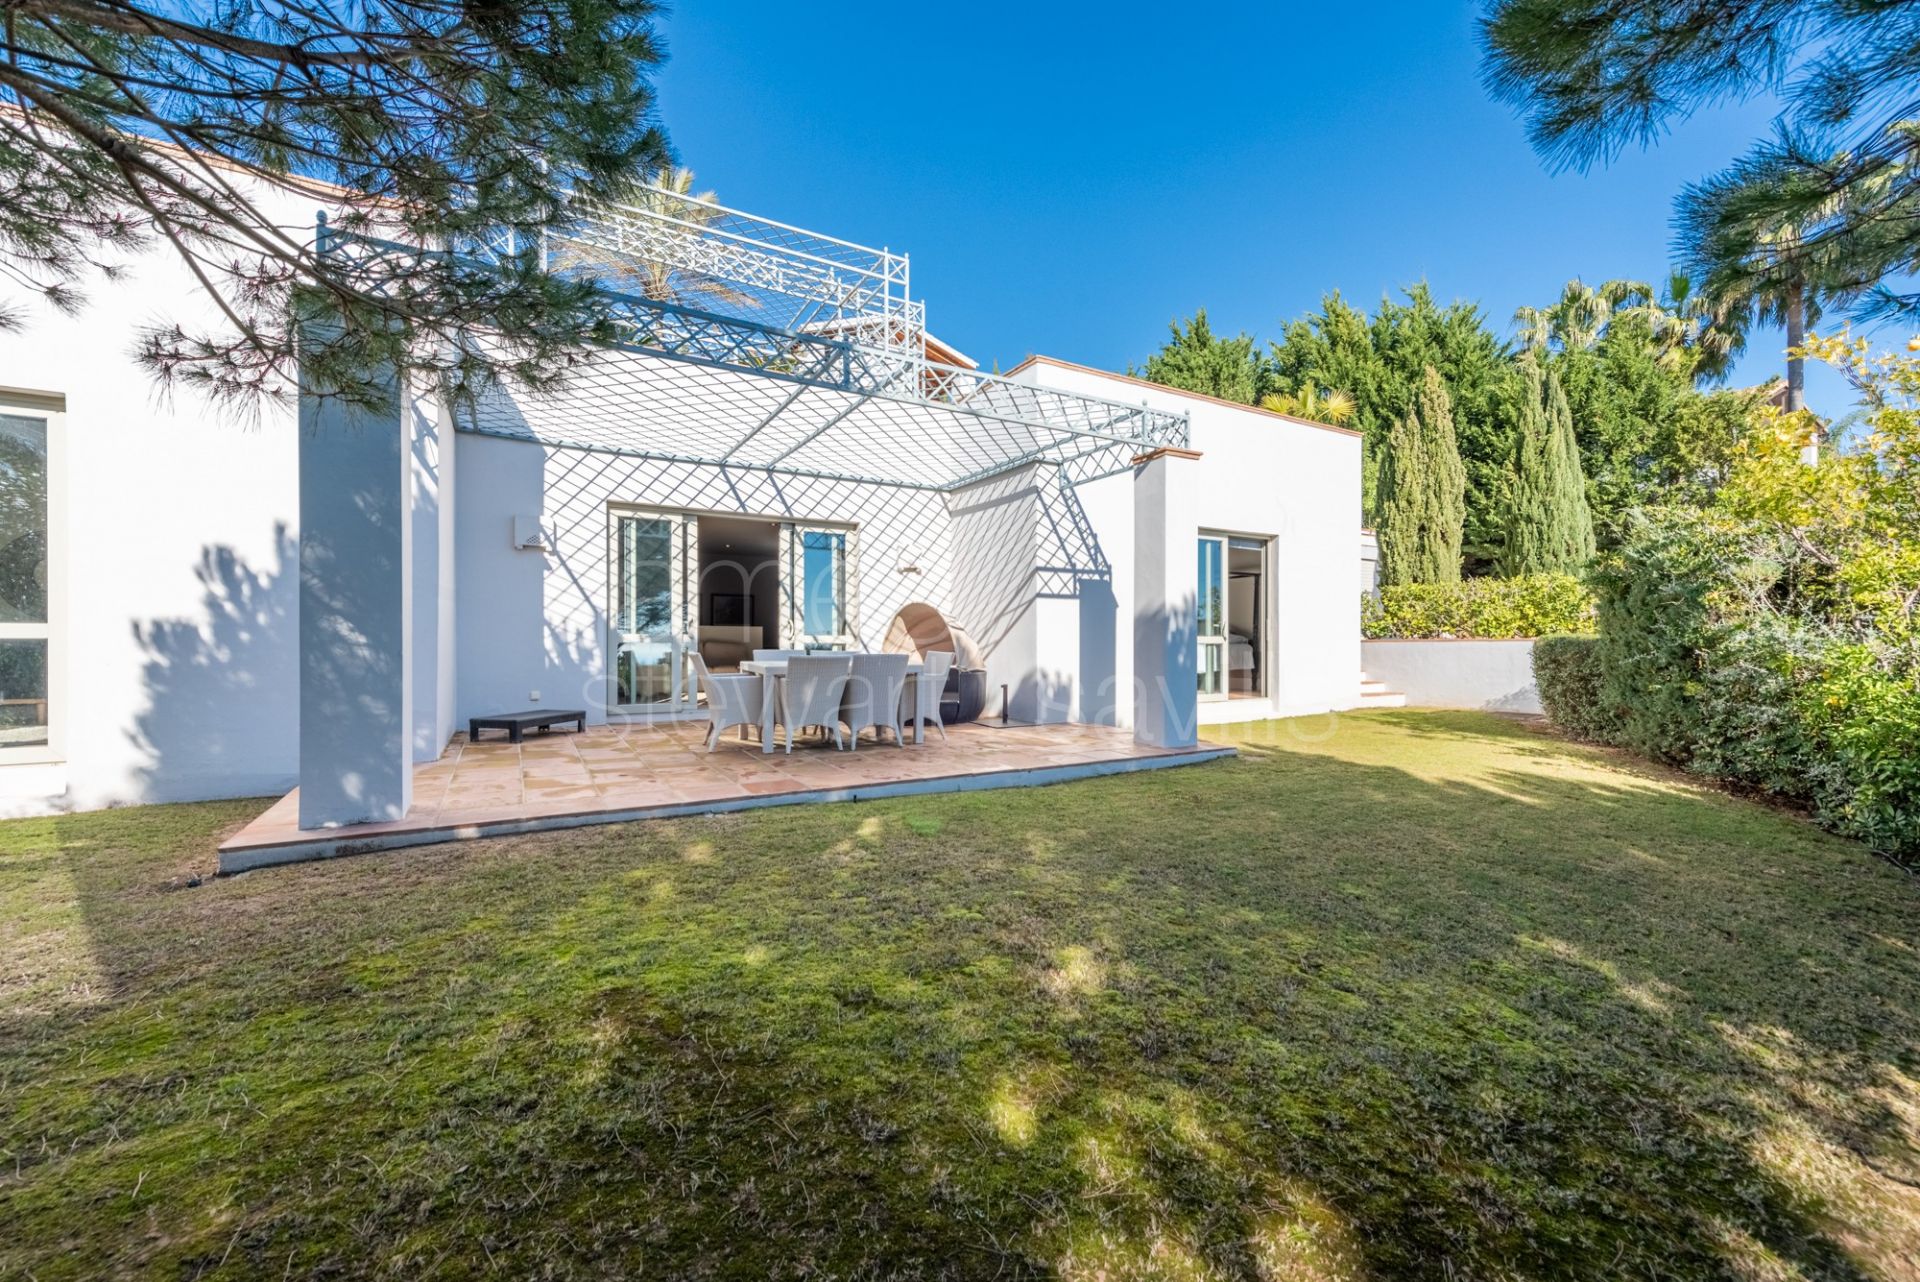 Breathtaking views from a fabulous villa at the highest point of La Reserva, Sotogrande